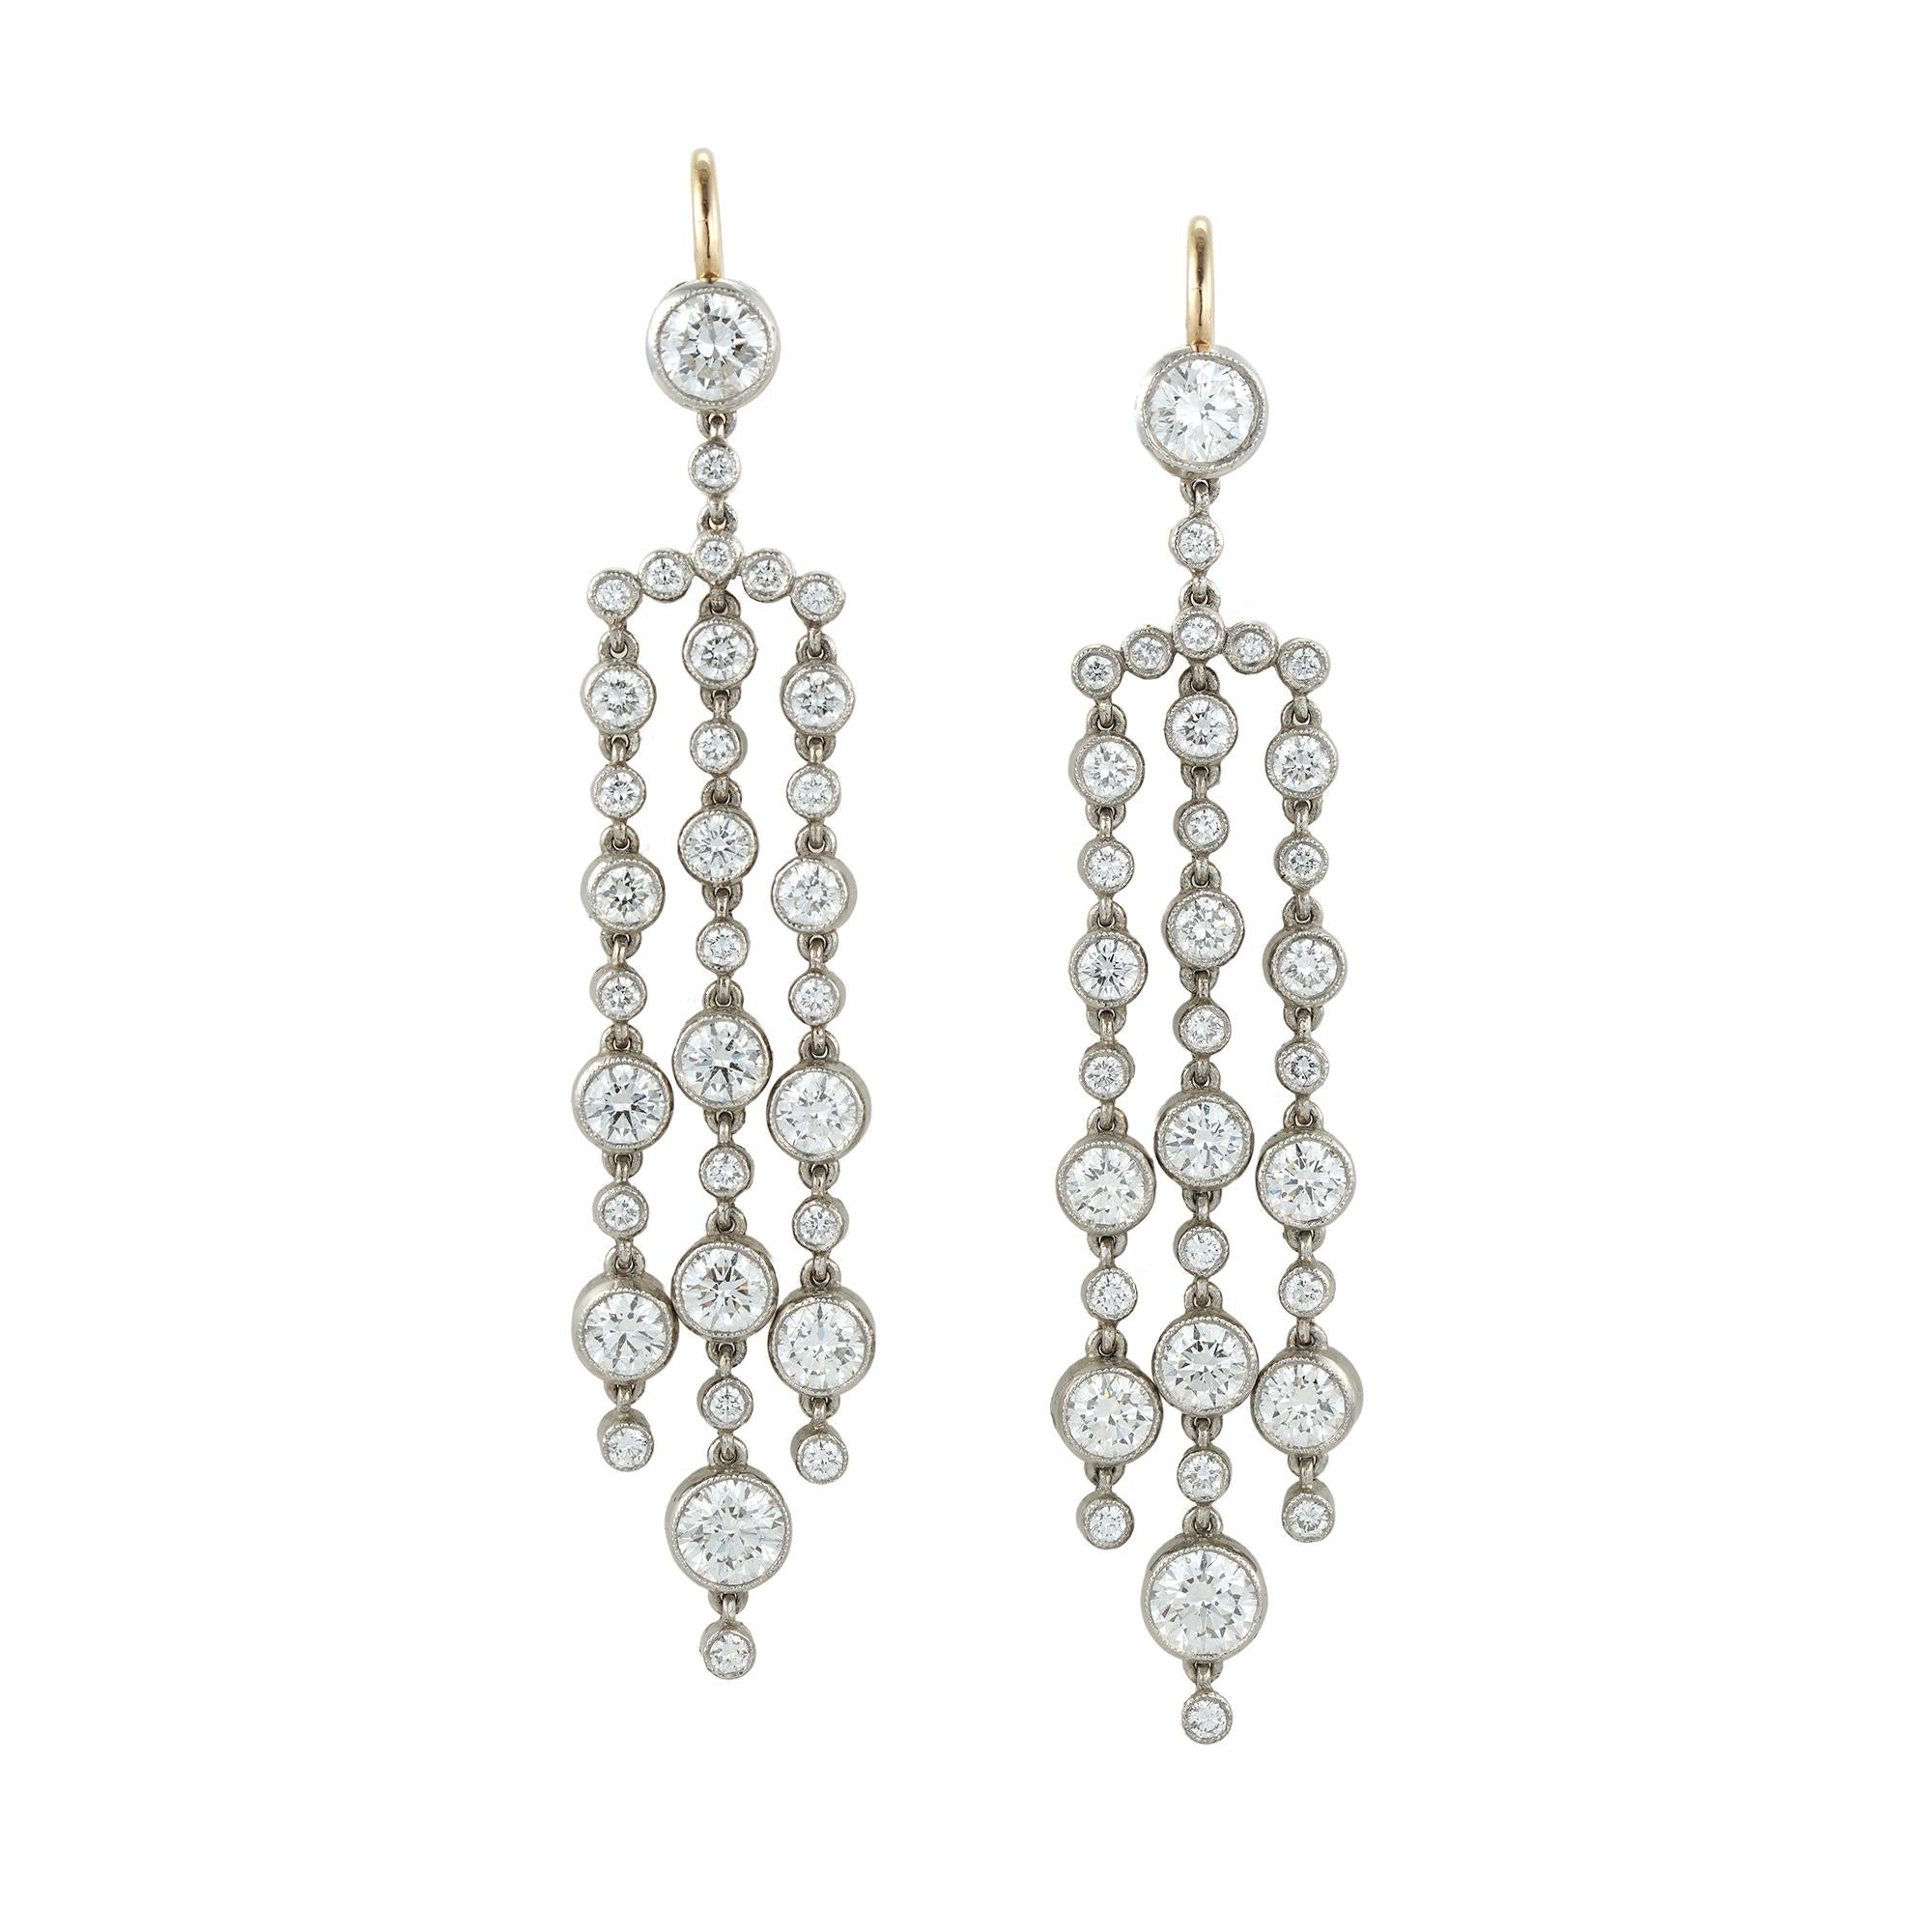 A pair of tassel diamond drop earrings, each earring comprising three graduating round brilliant-cut diamond-set tassels suspended from a curved bar with five diamonds surmounted from a round brilliant-cut diamond top, all diamonds weighing